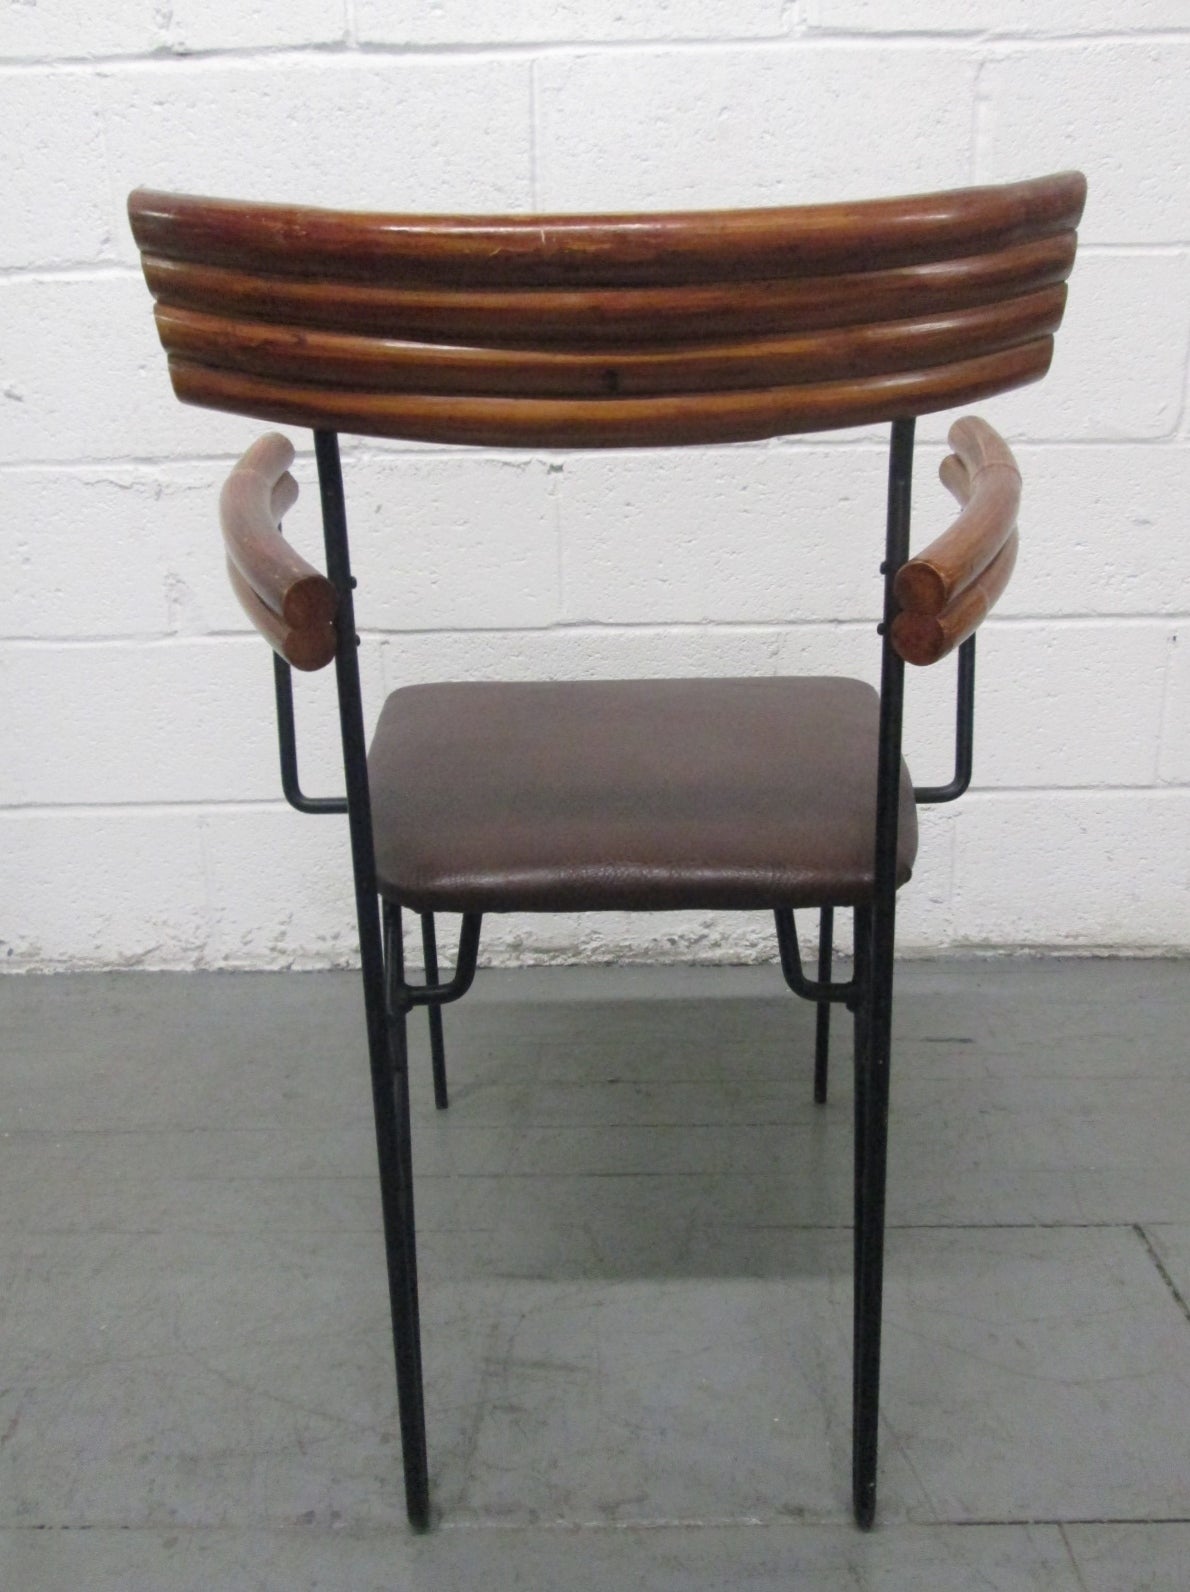 Four 1950s wrought iron and rattan armchairs with leather seats. Has a wrought iron frame with a decorative pattern. Patio Furniture. Bamboo Curved arms. Measure: Arm height is 26.75H. 